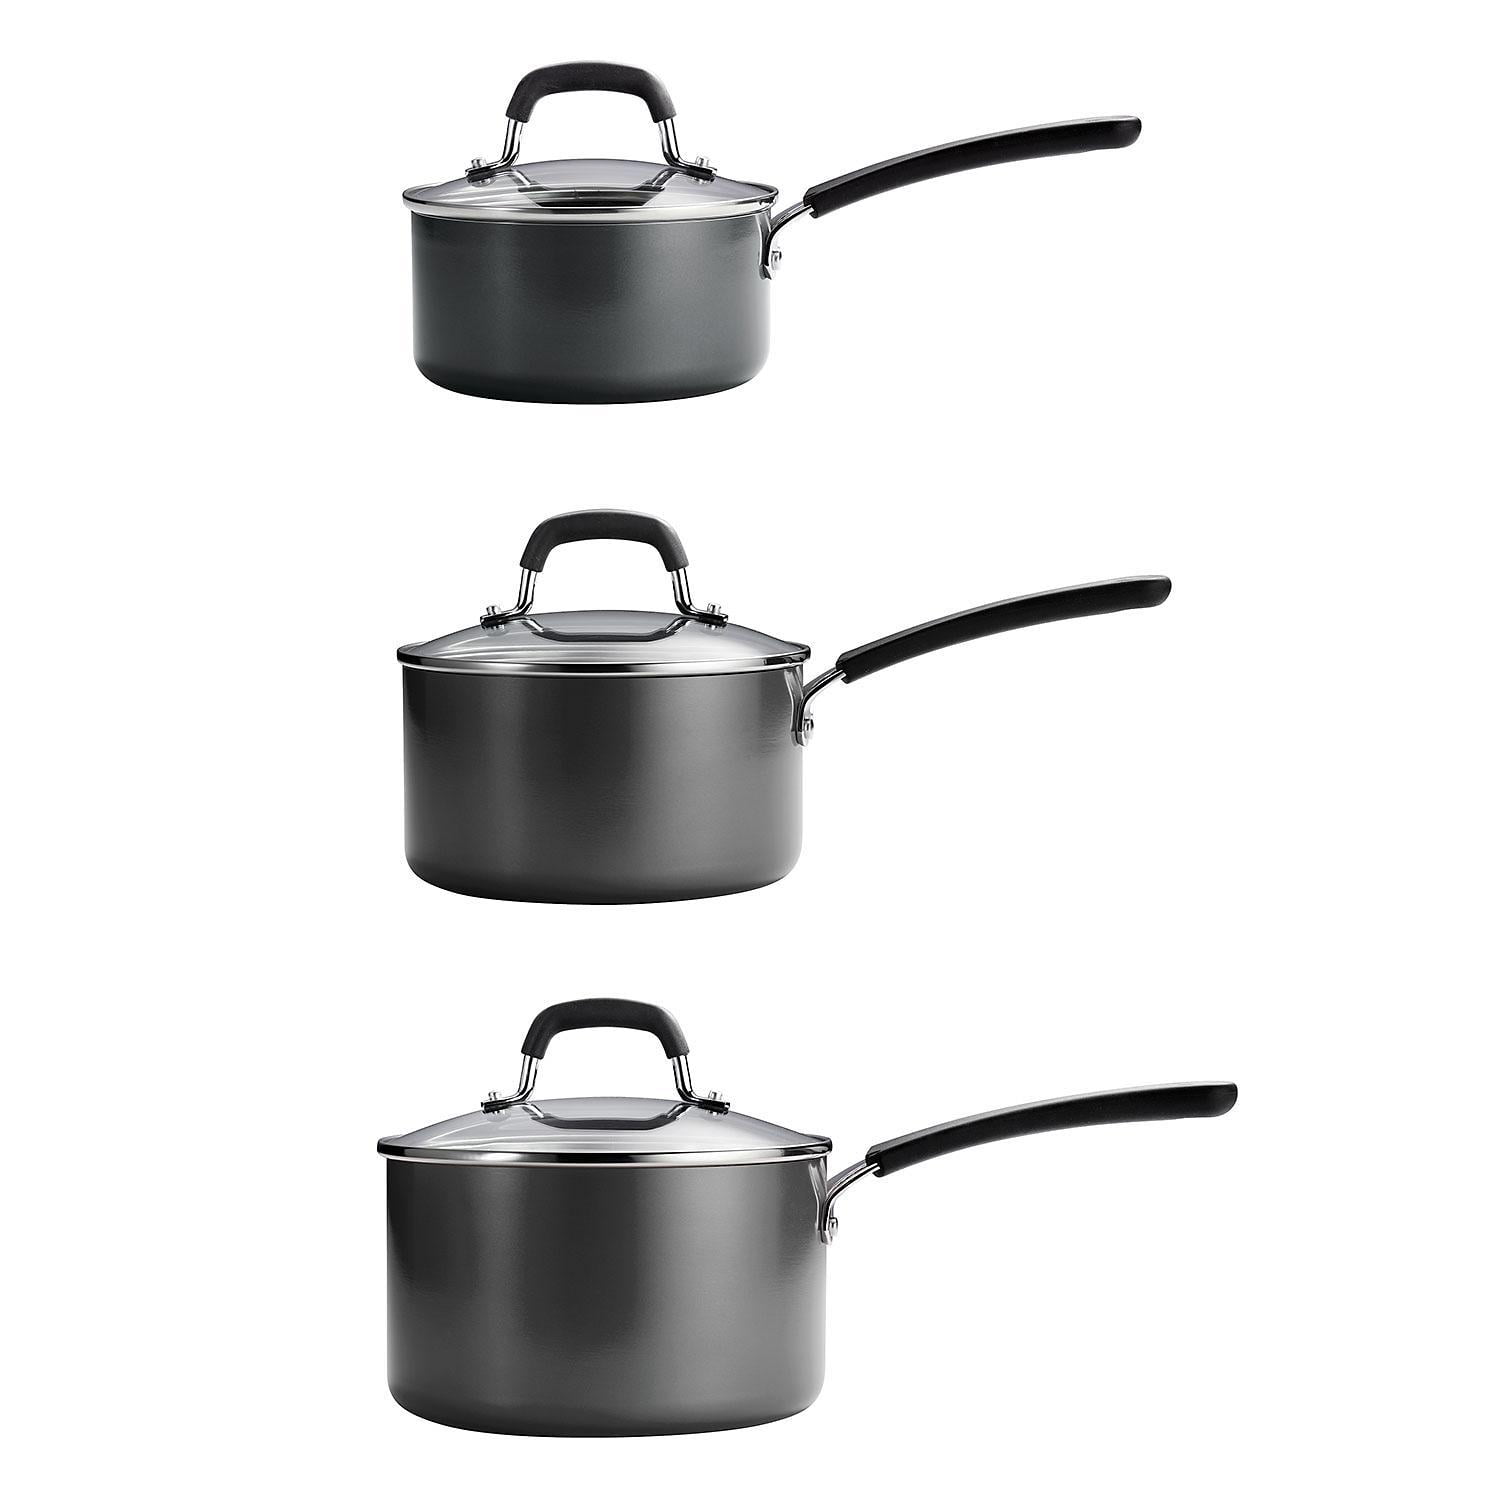 Tramontina tramontina 6 pc stainless steel stackable cookware set